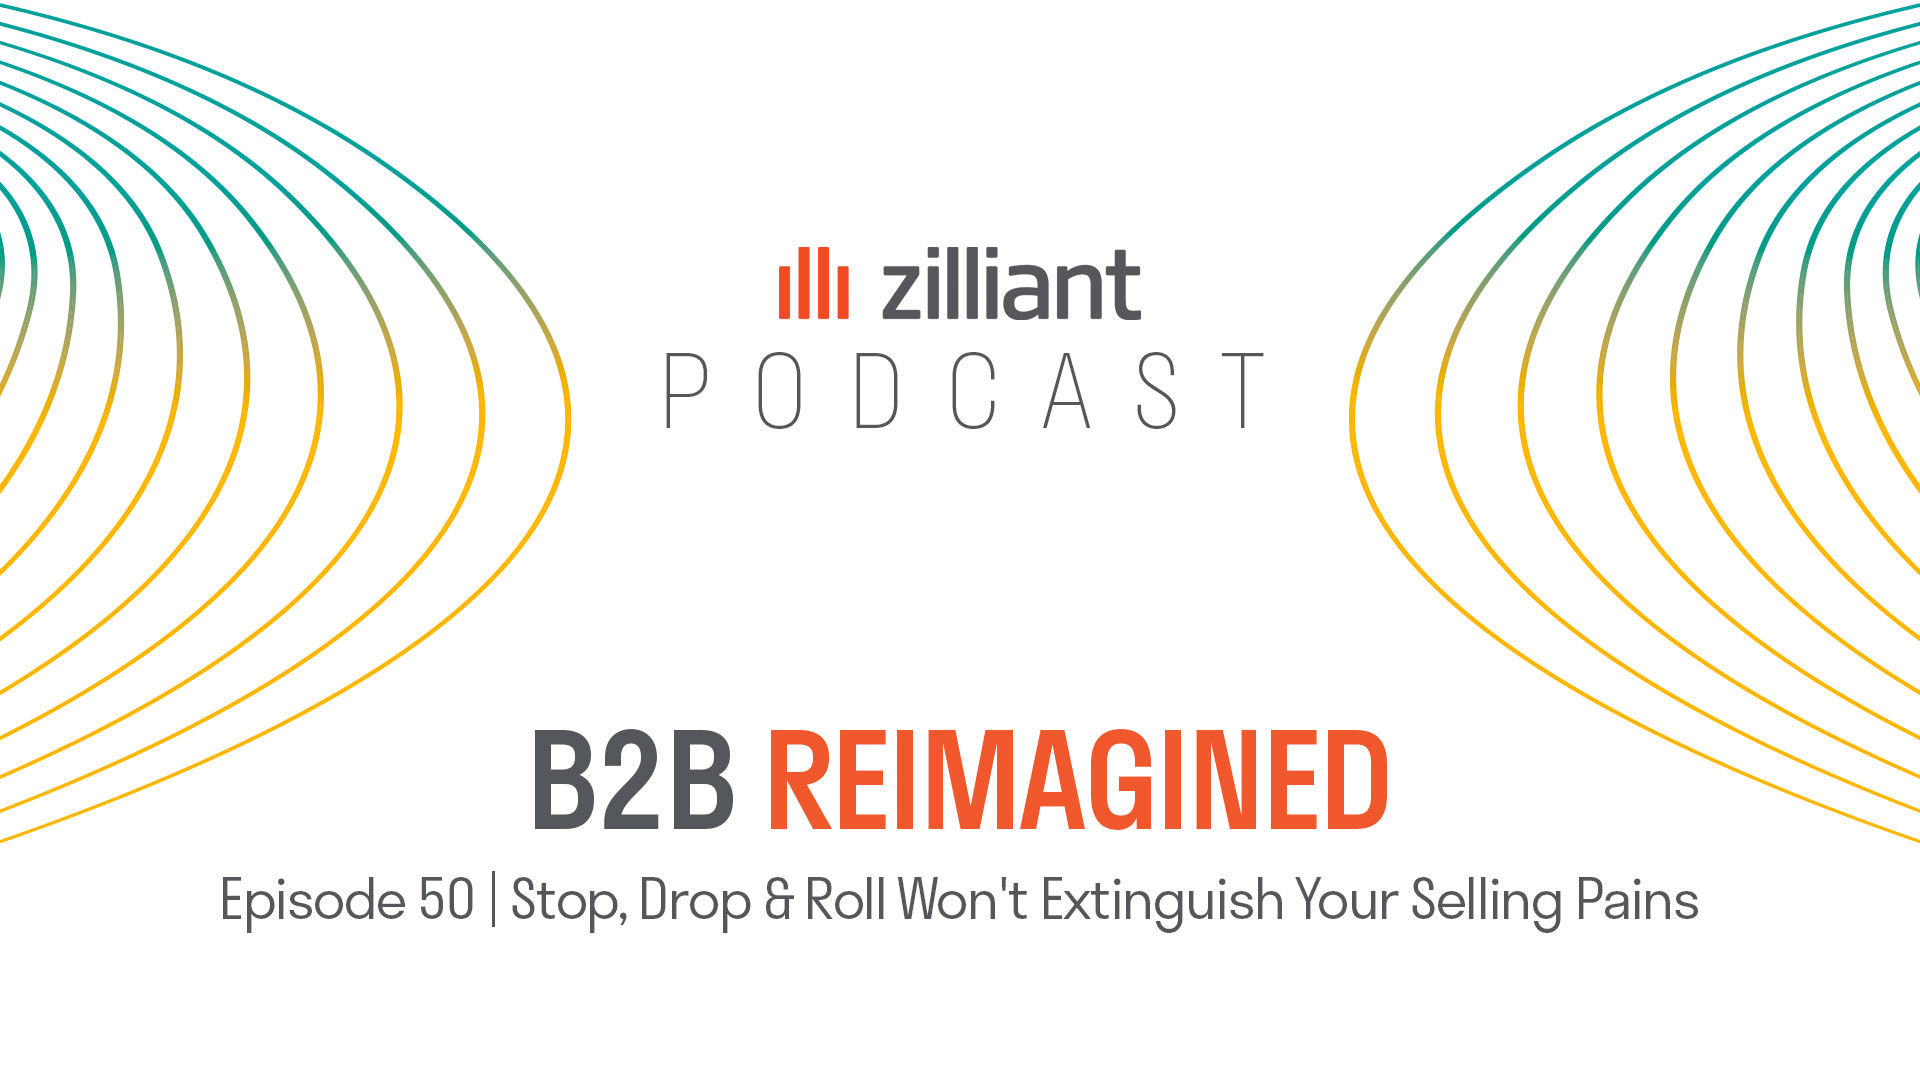 B2B Reimagined: Ep 50 | Stop, Drop & Roll Won’t Extinguish Your Selling Pains w/ Ian Altman